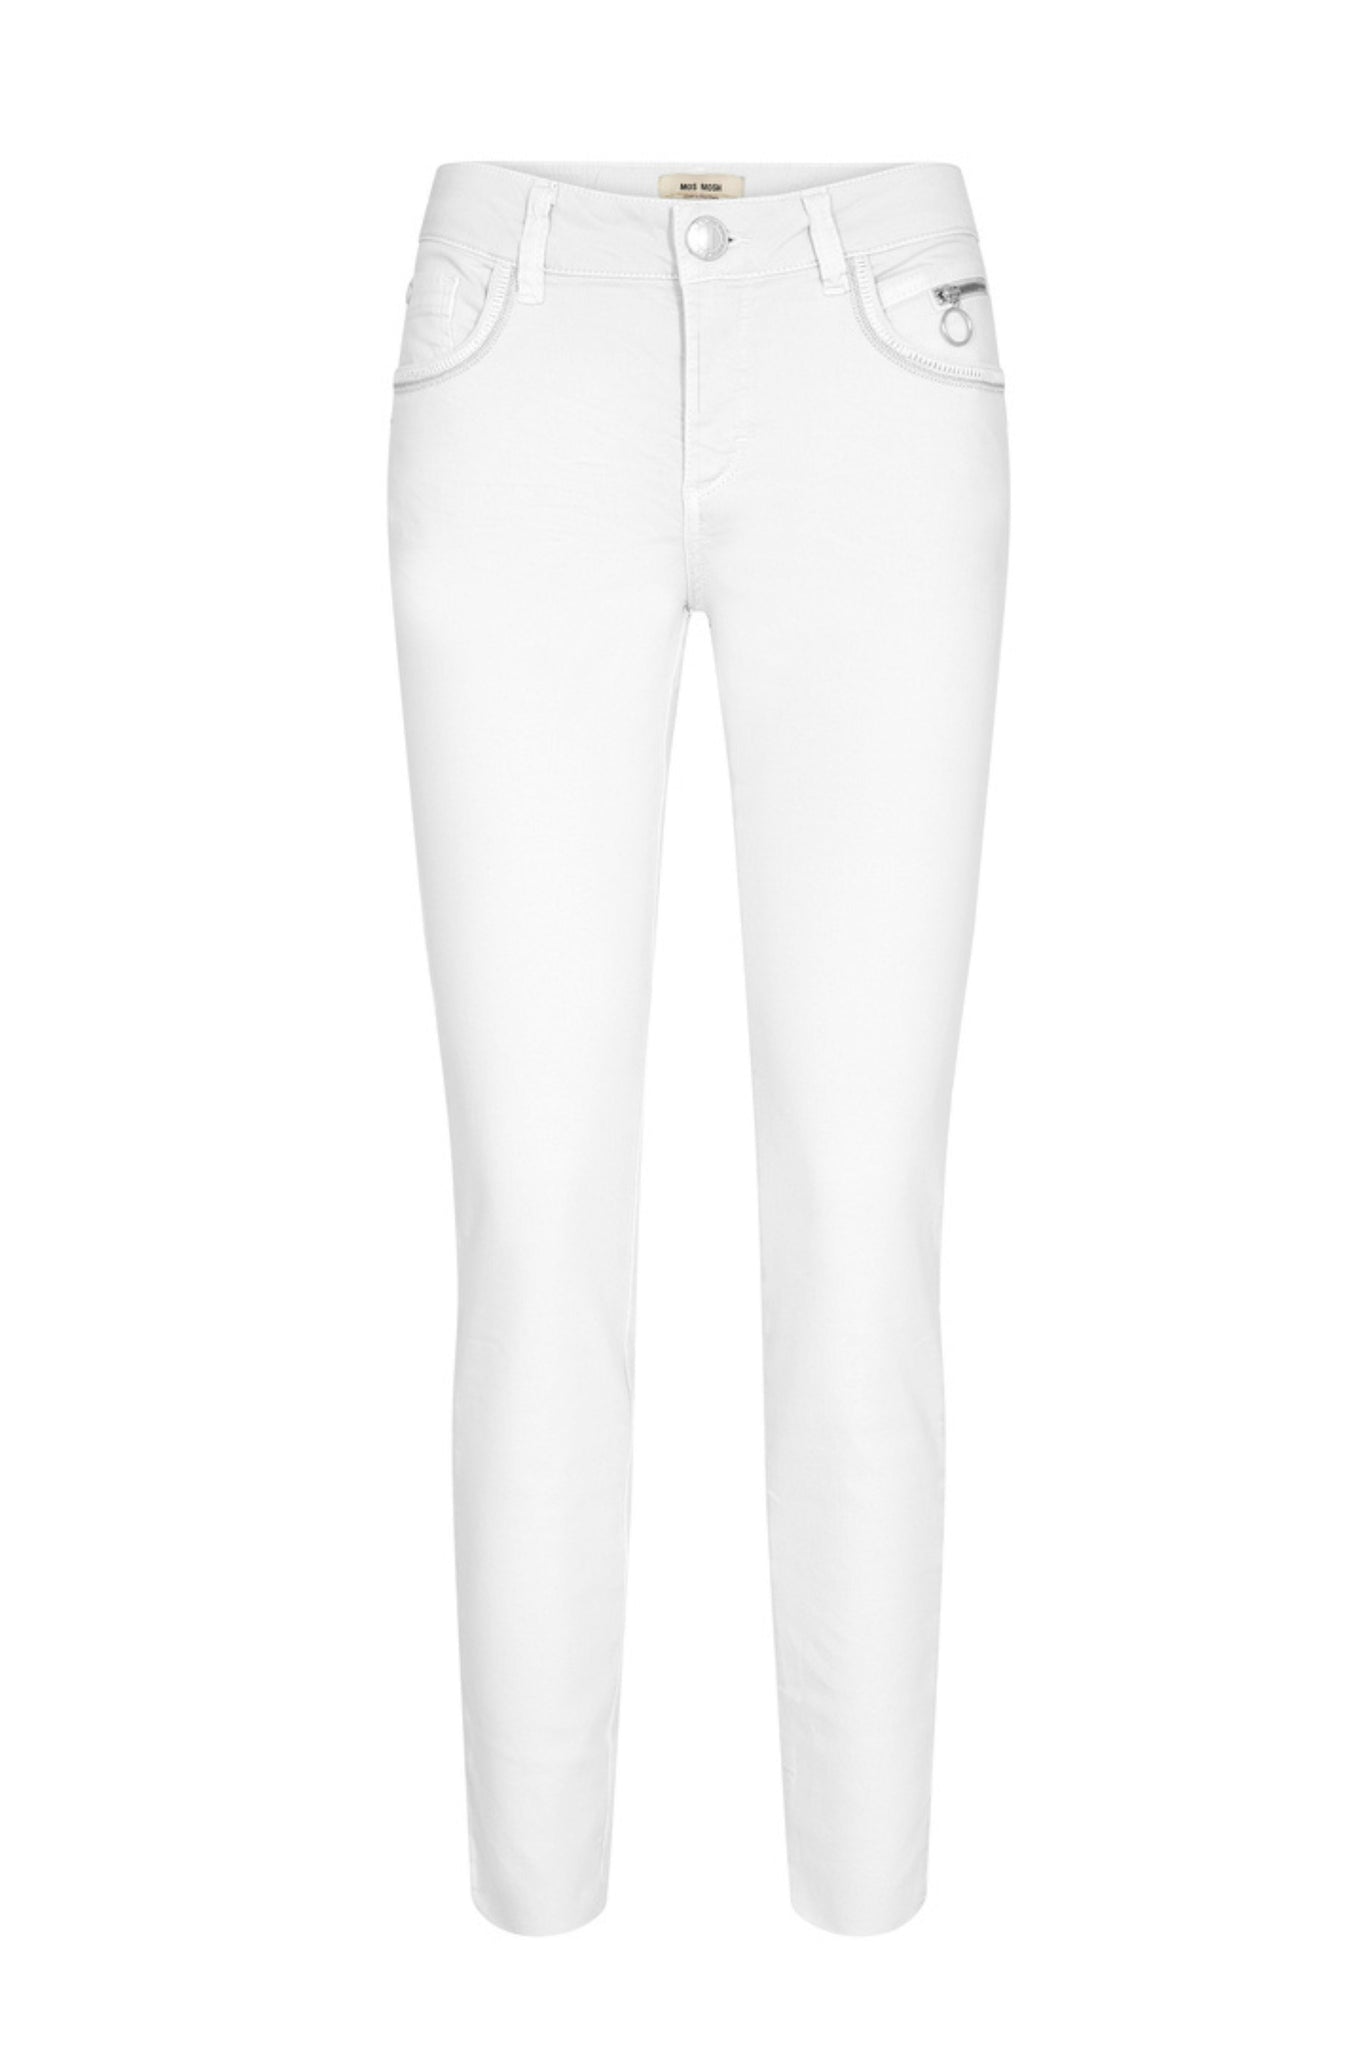 Sumner Power Pant - White SIZE 24/6 ONLY